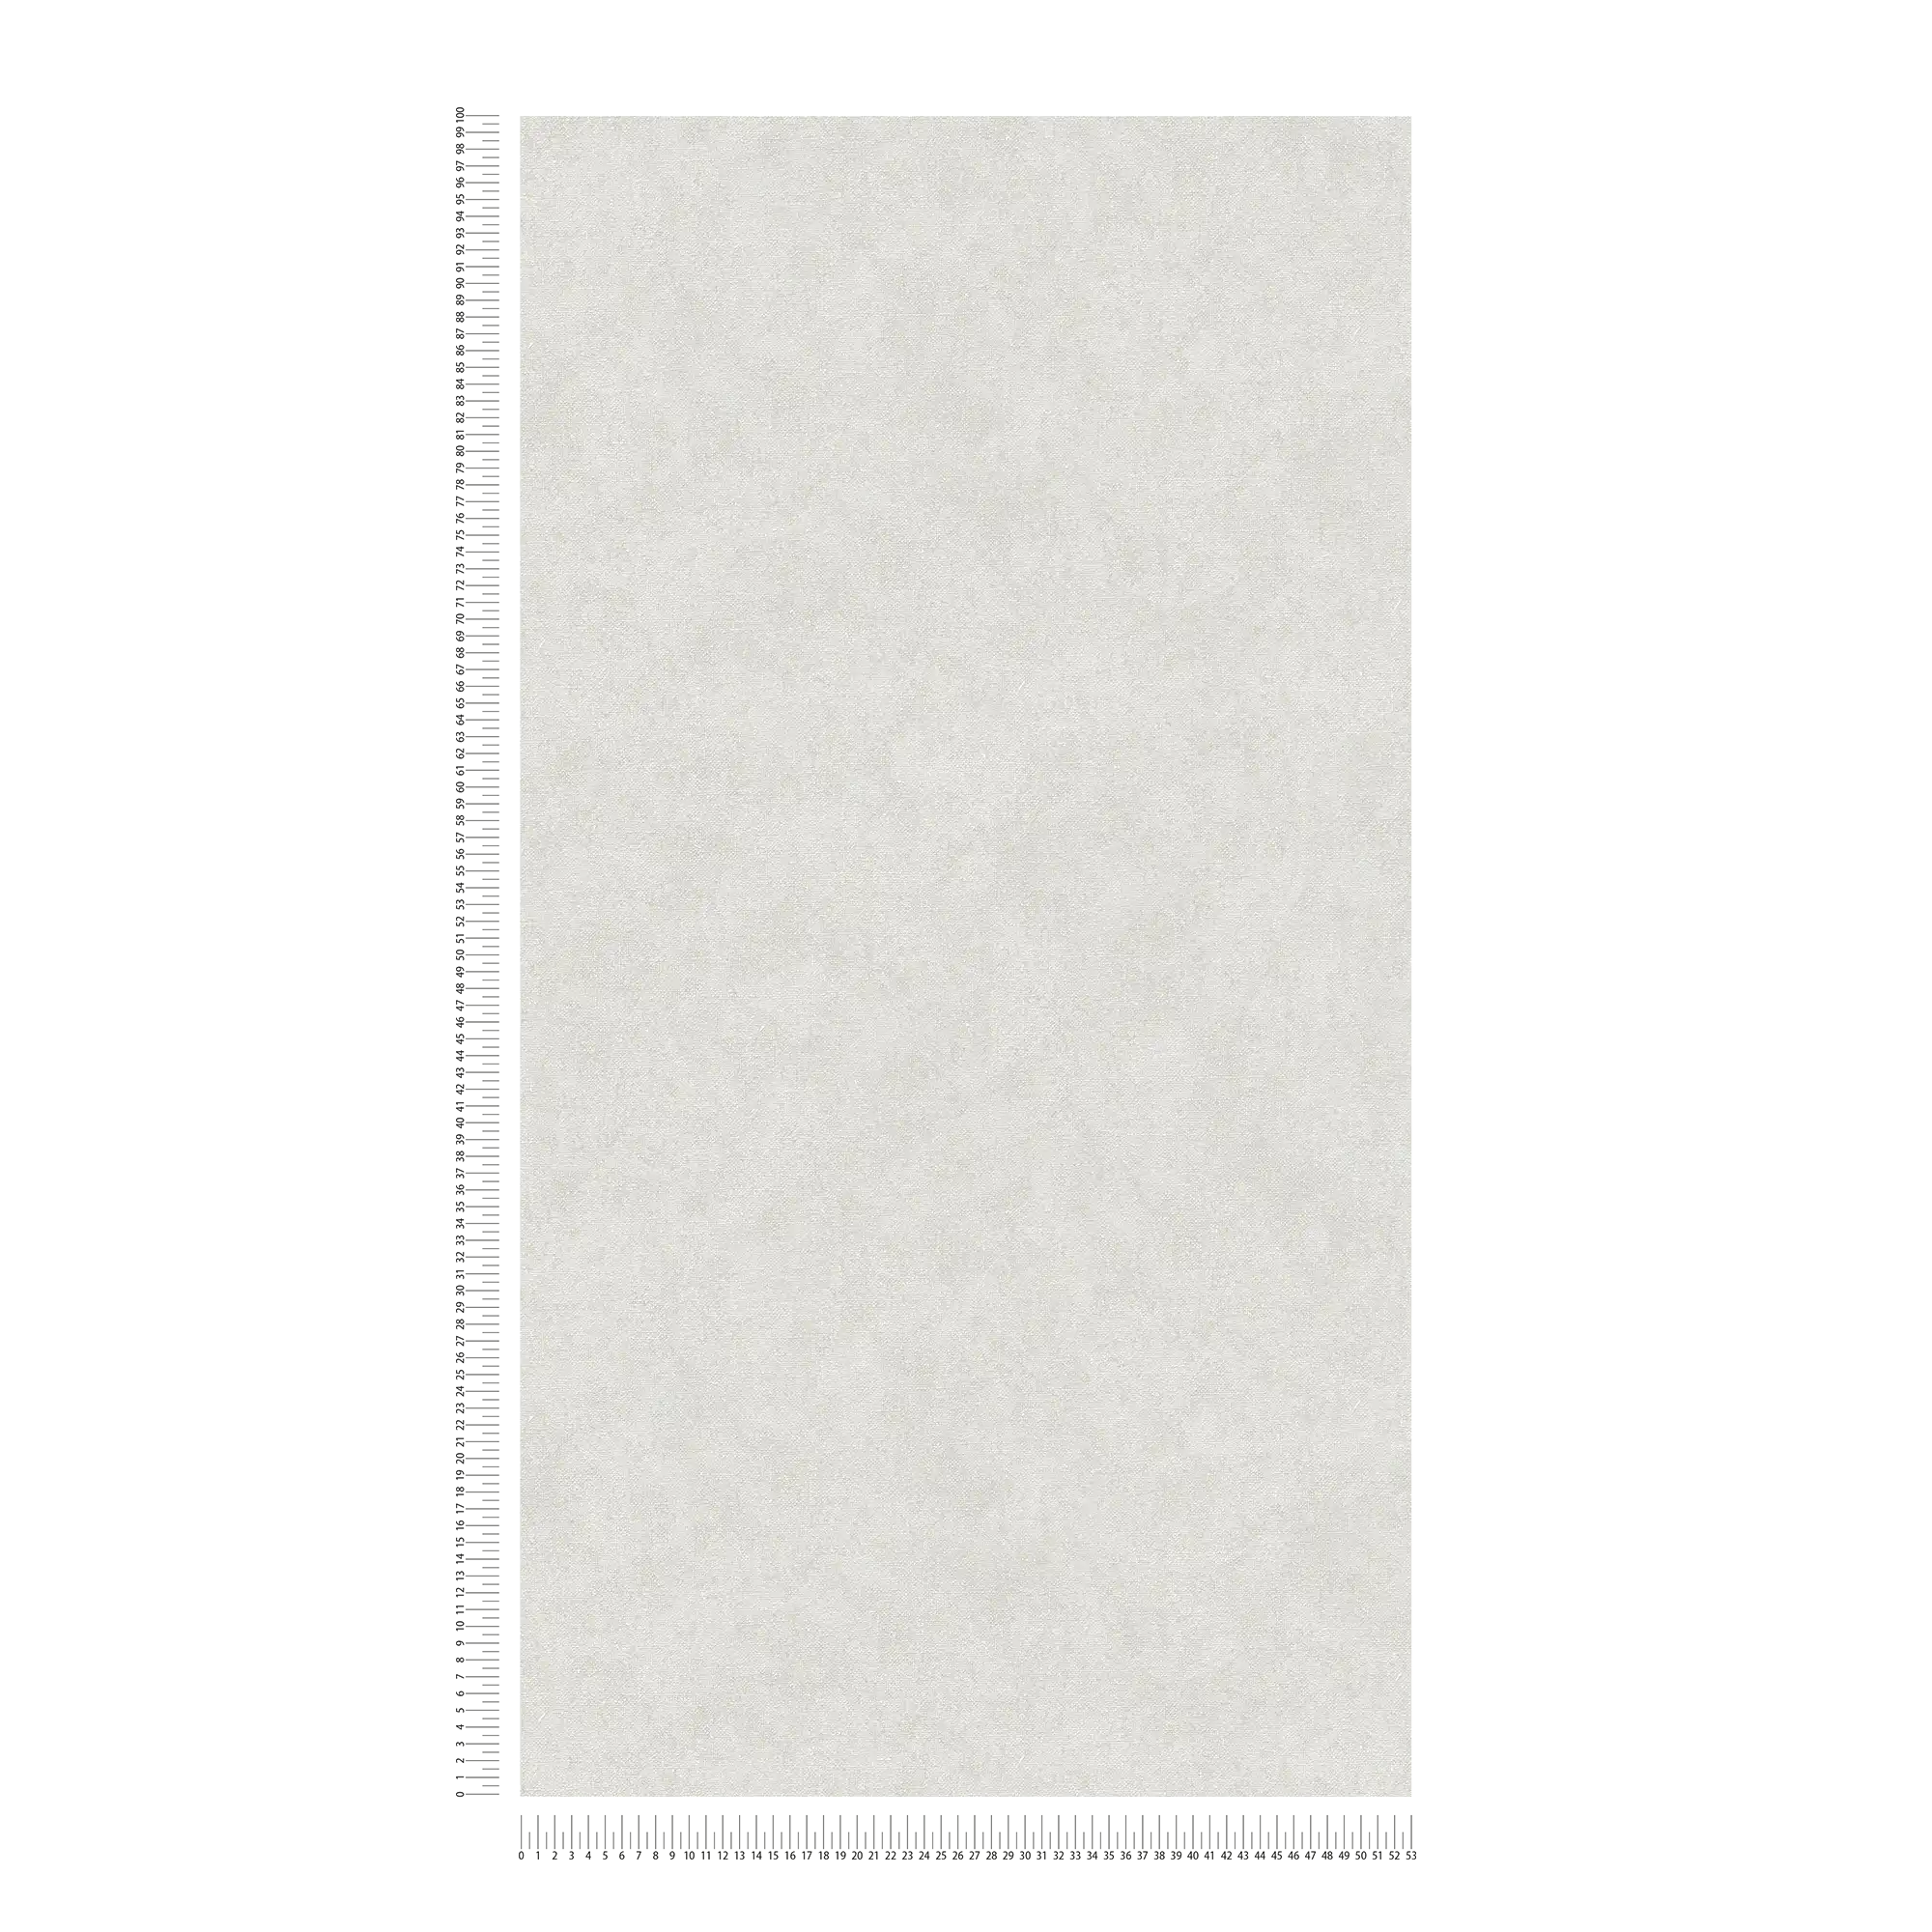             Pale grey plain wallpaper with textile look - grey
        